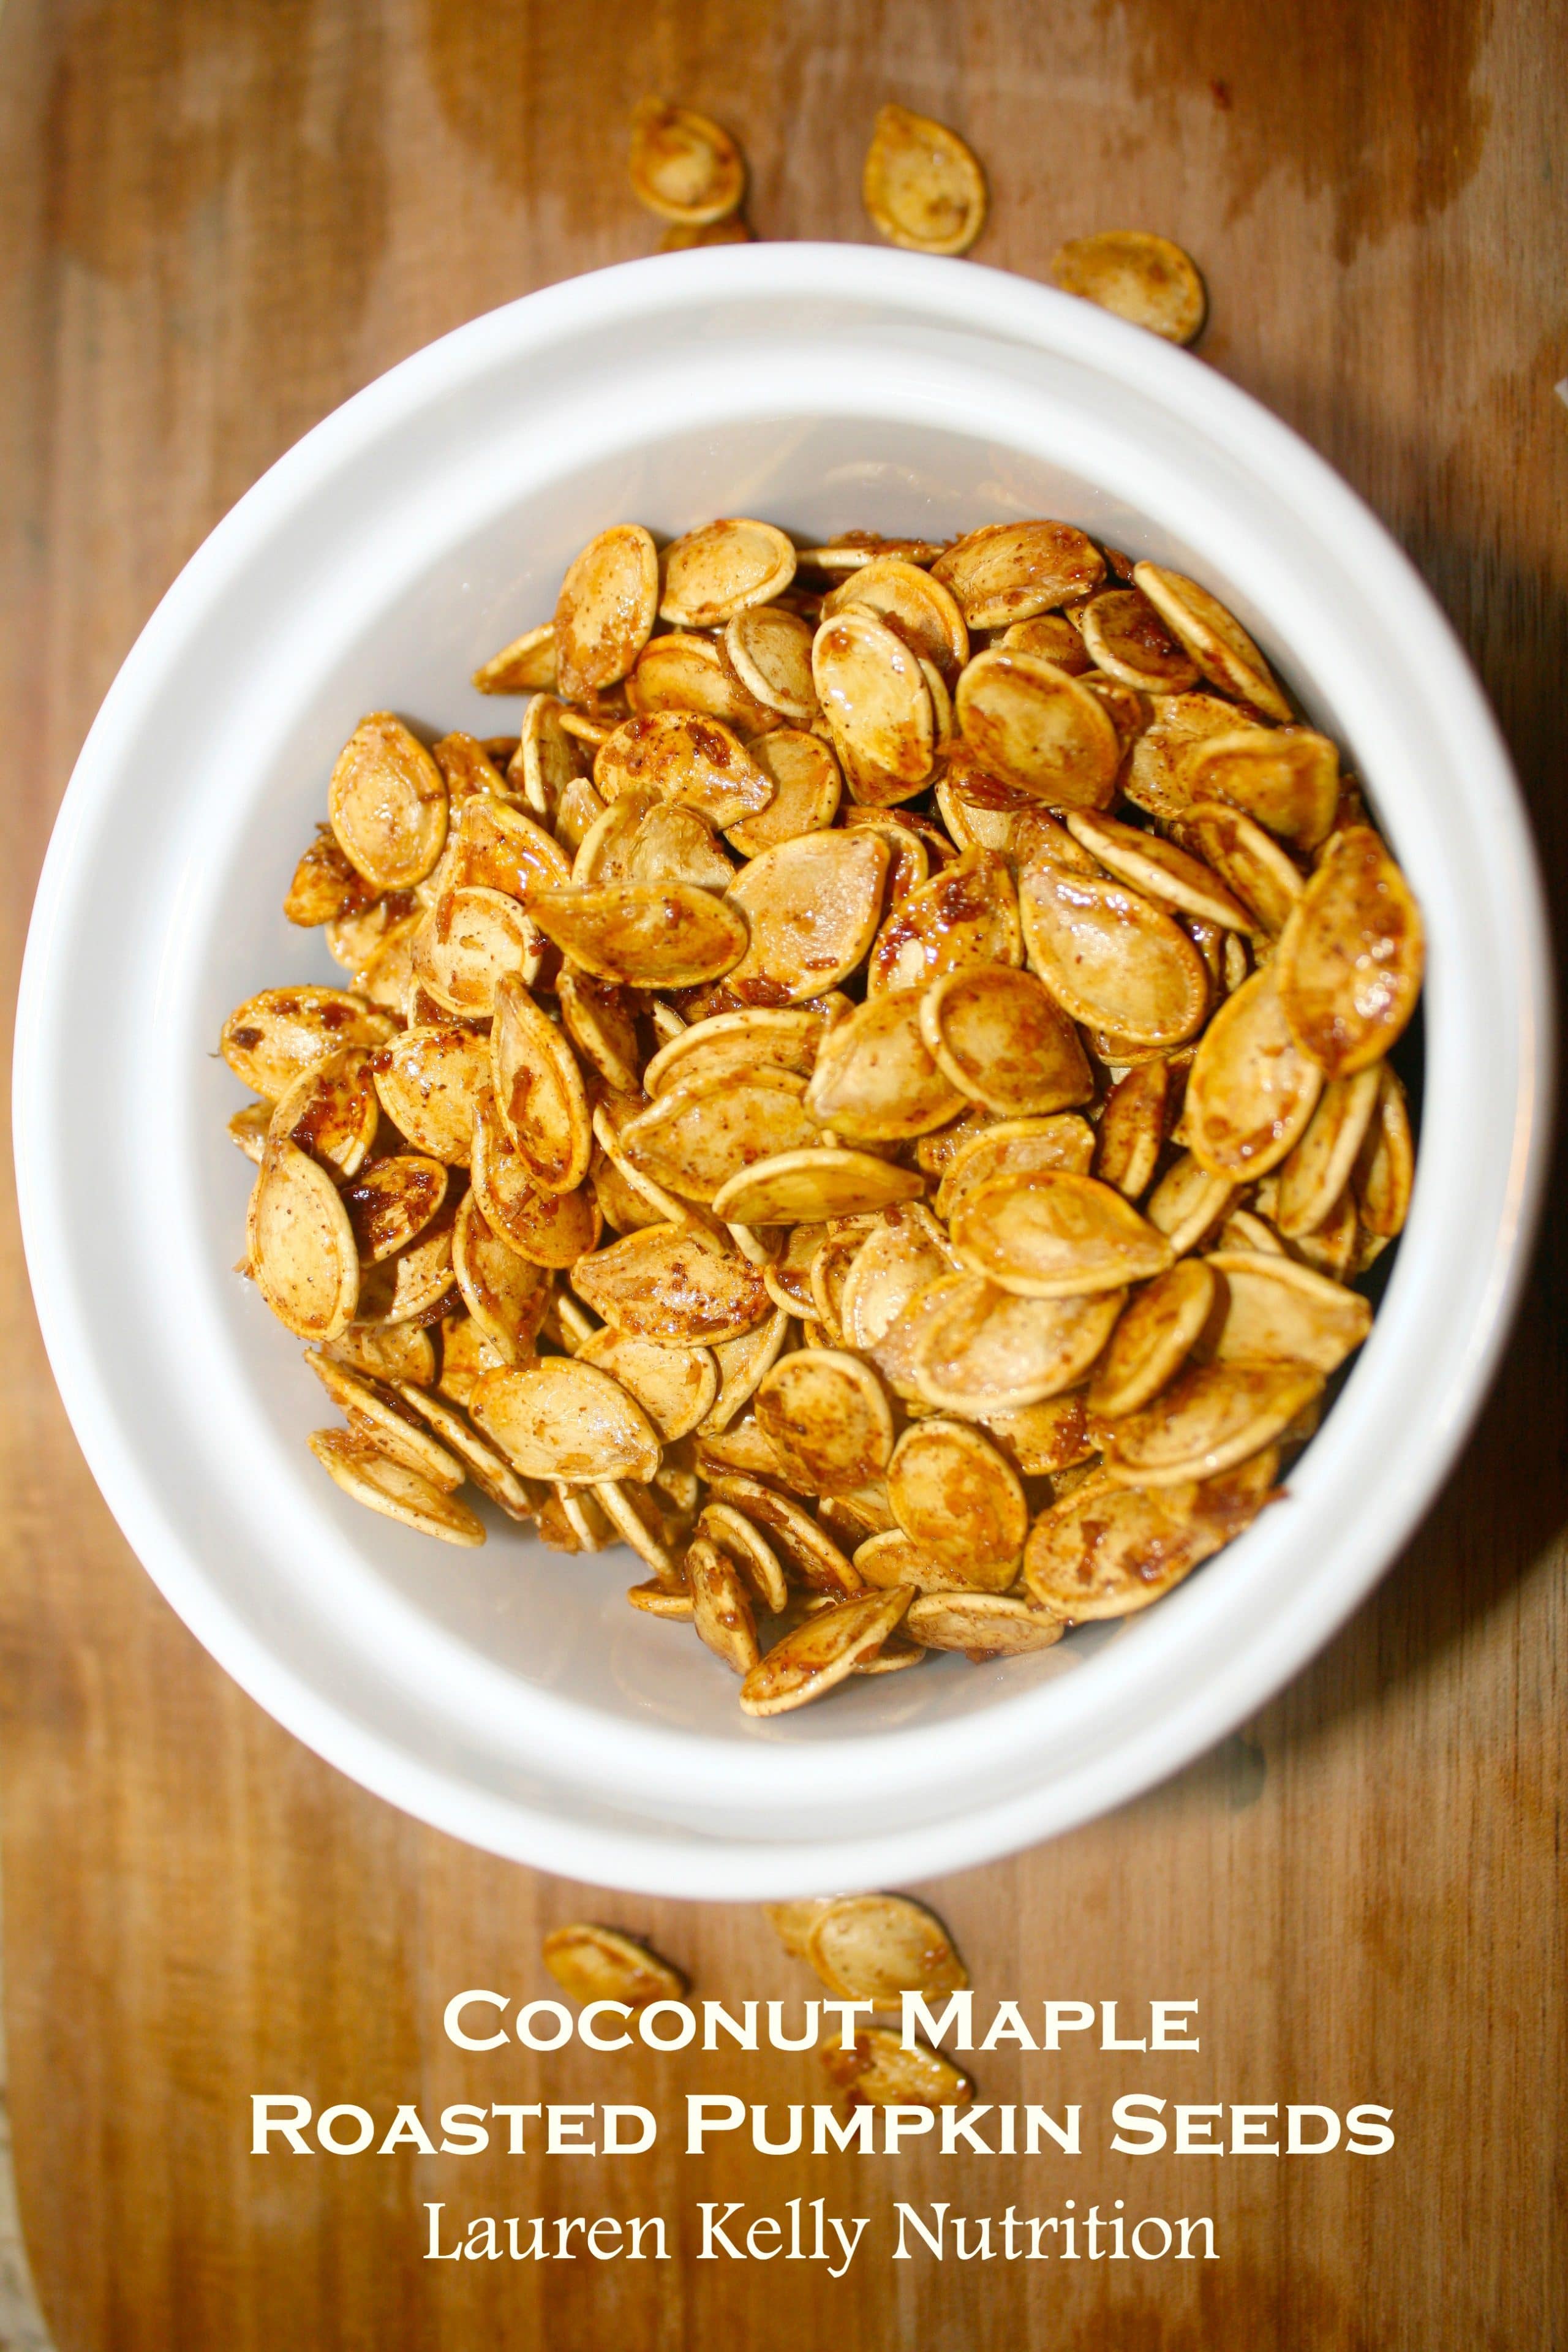 Coconut Maple Roasted Pumpkin Seeds in a white bowl.